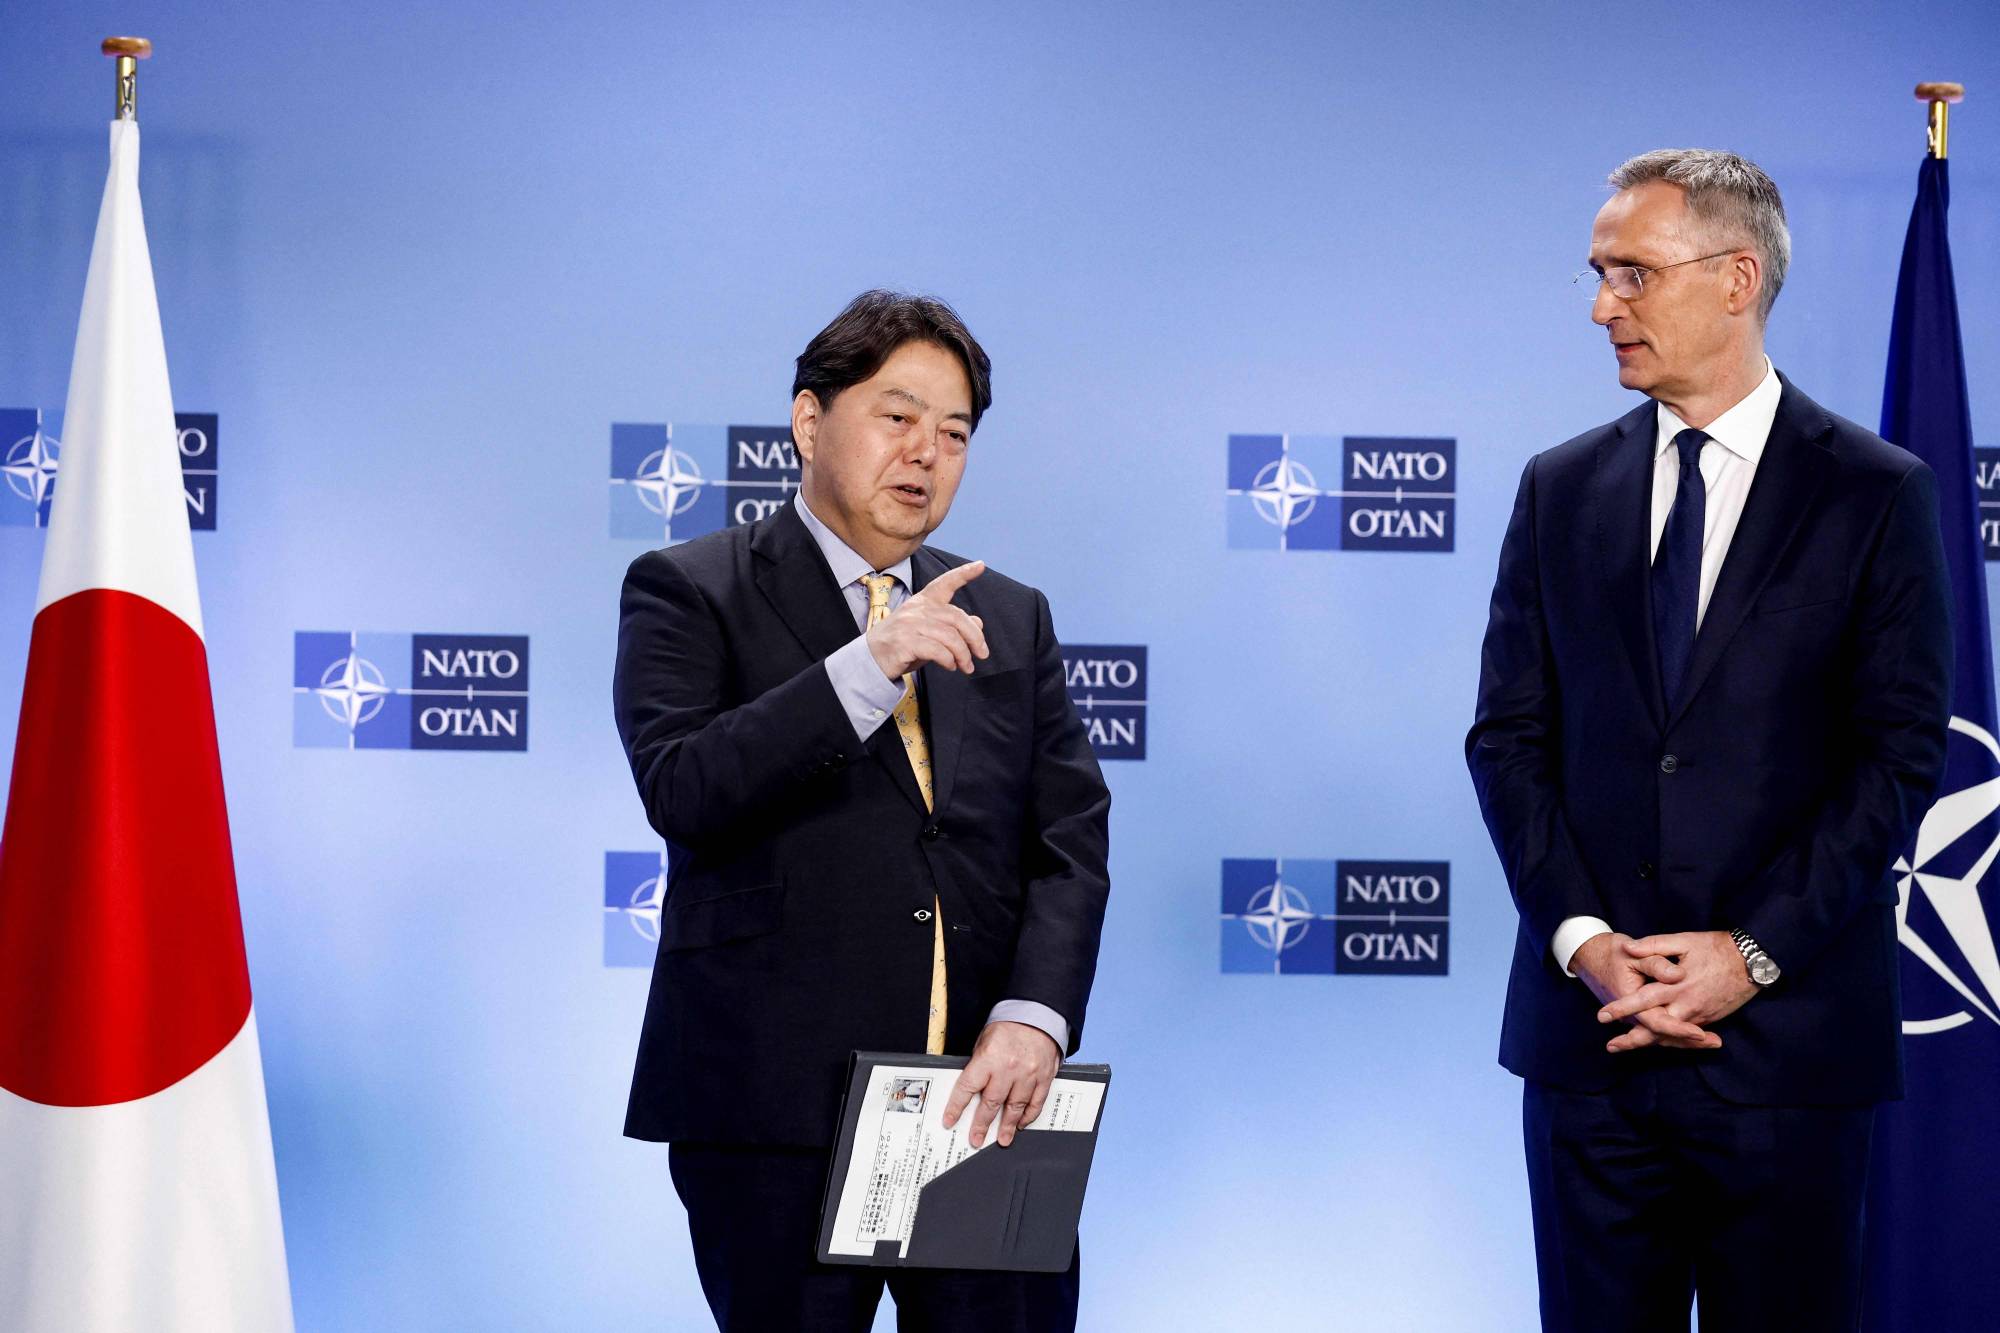 Foreign Minister Yoshimasa Hayashi and NATO Secretary General Jens Stoltenberg hold a news conference following a NATO foreign ministers meeting in Brussels on Tuesday. | AFP-JIJI